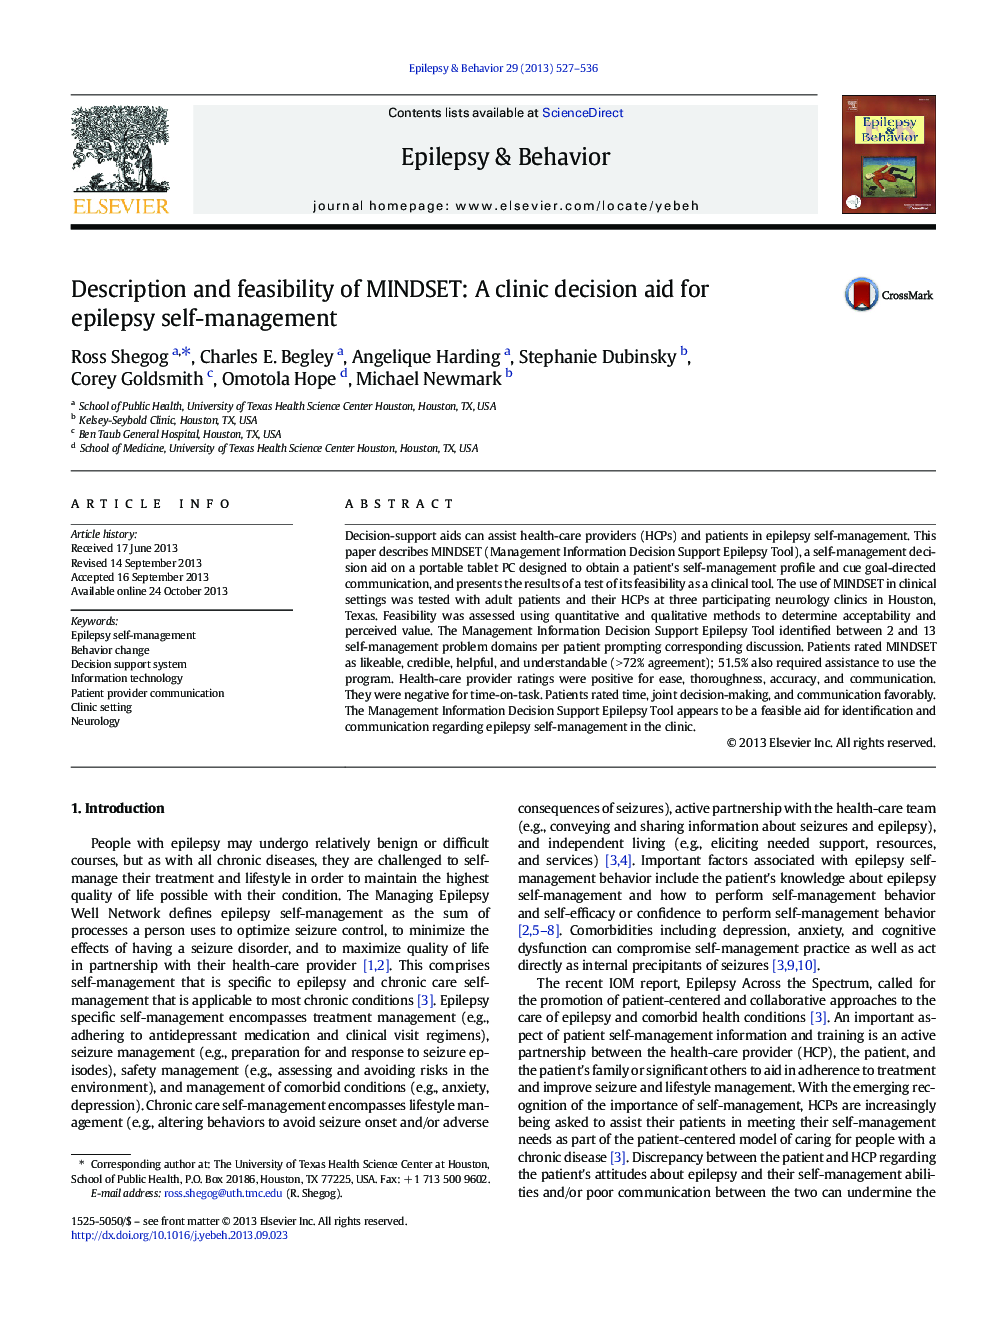 Description and feasibility of MINDSET: A clinic decision aid for epilepsy self-management